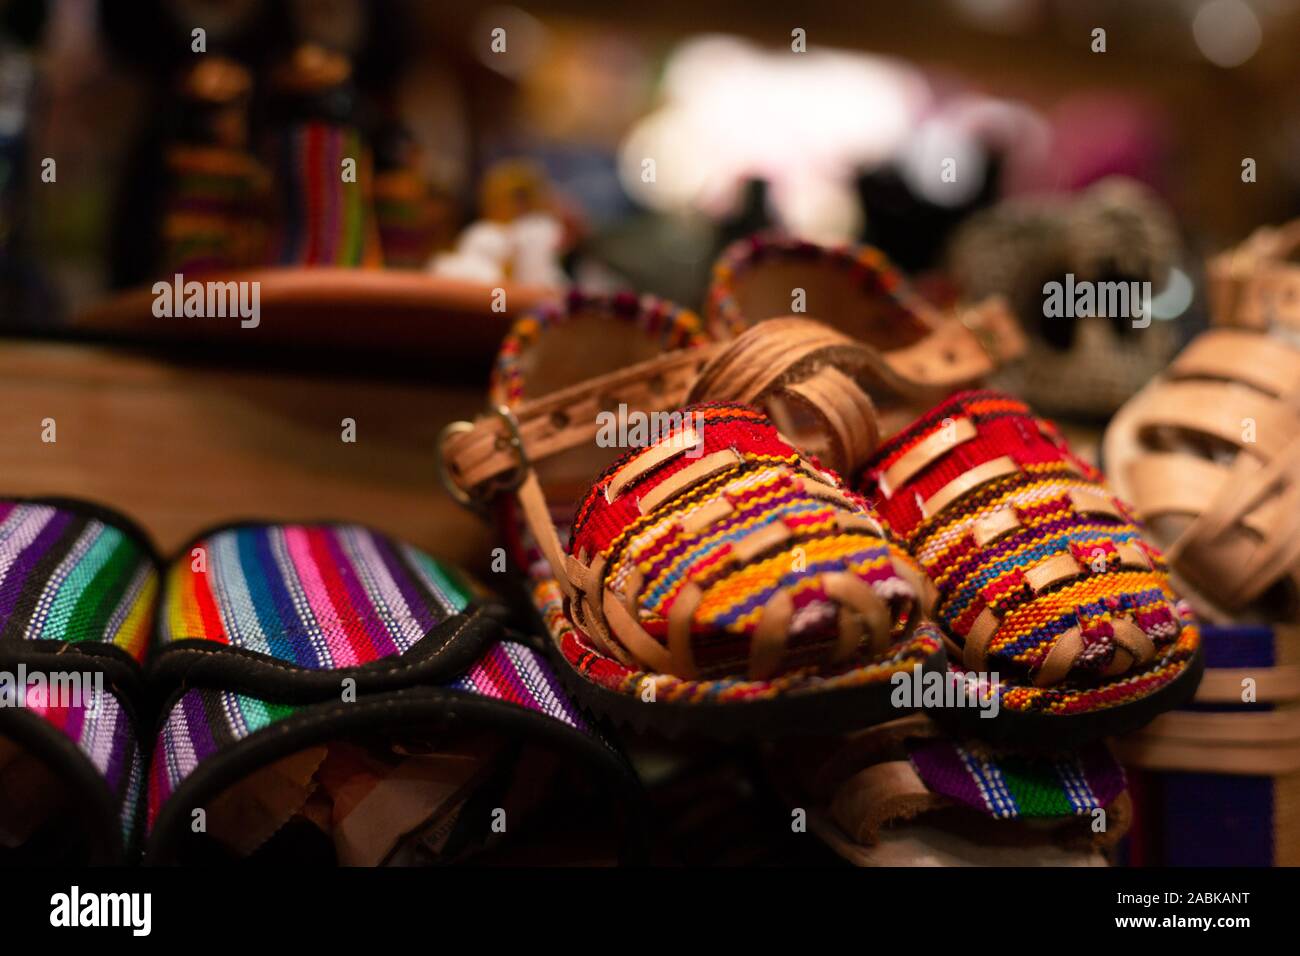 typical Guatemalan colorful shoes Stock Photo